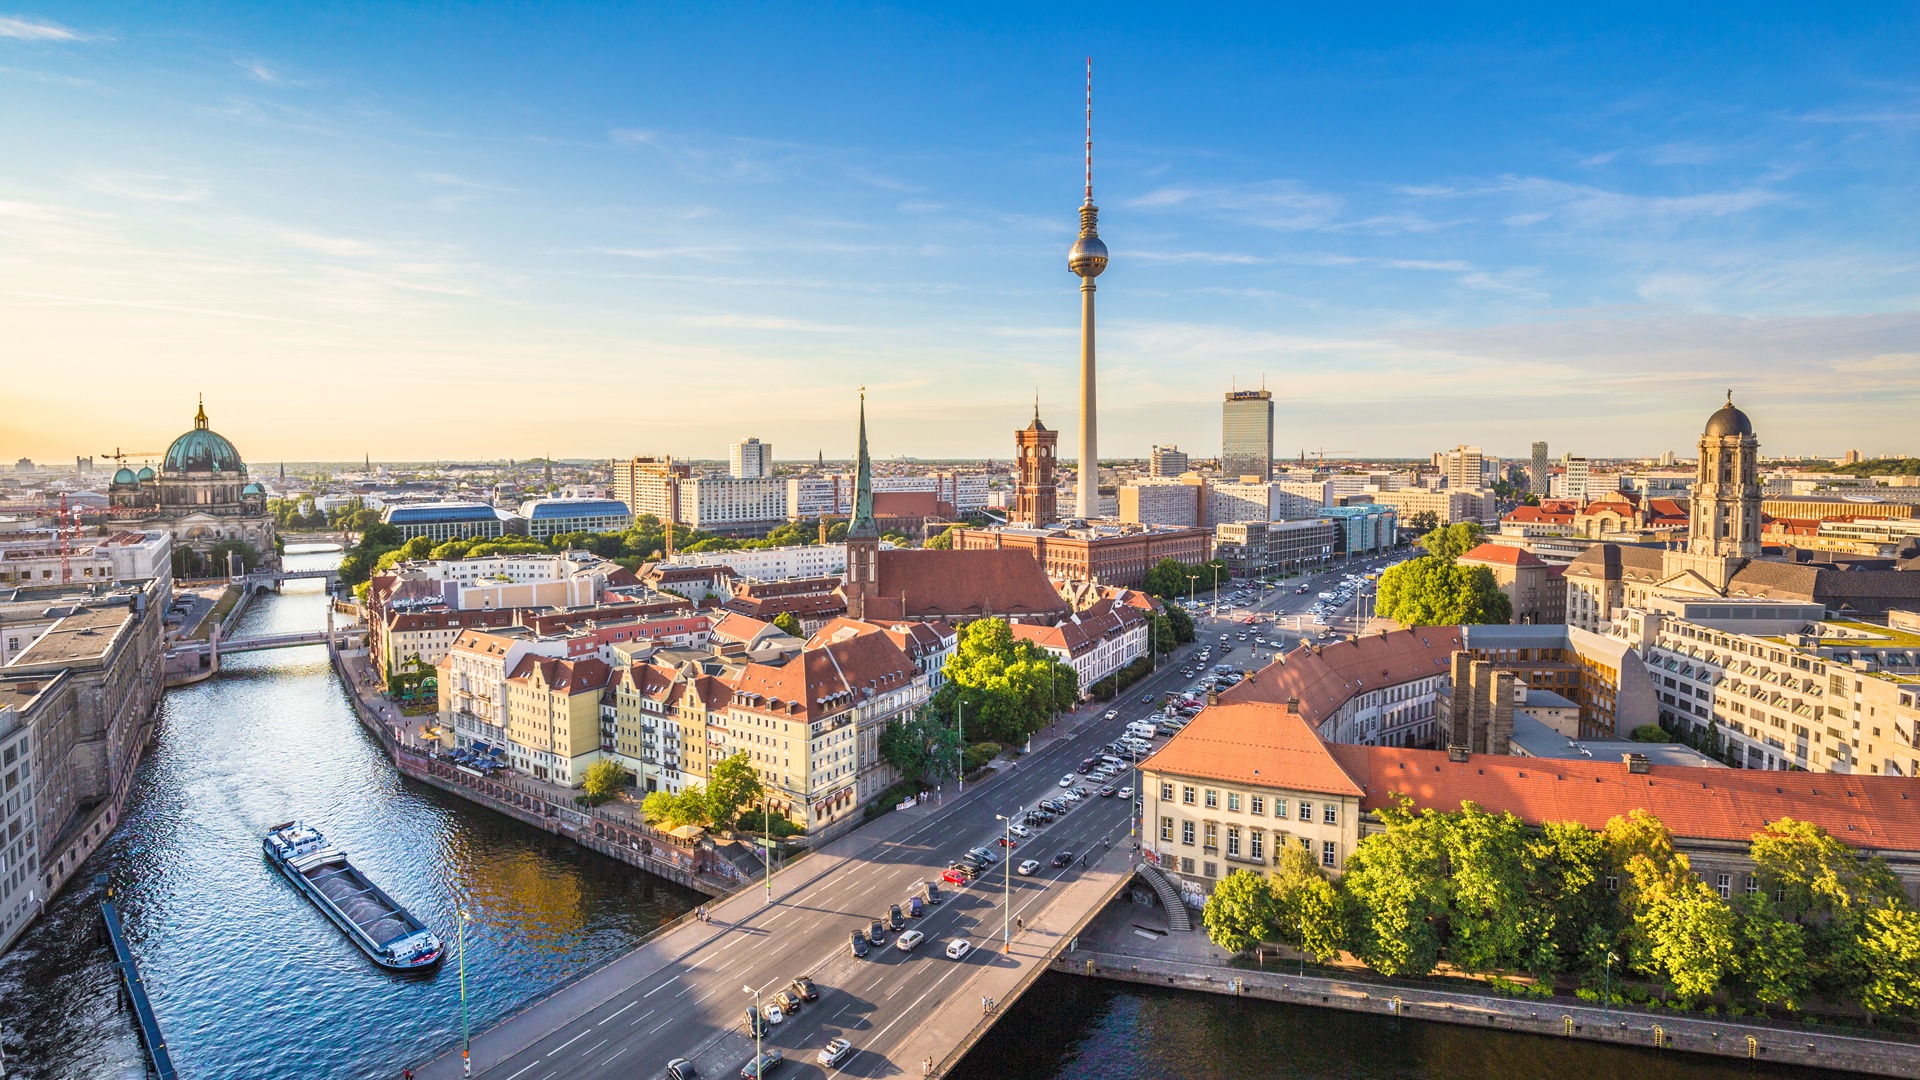 International Cannabis Business Conference returns to Berlin for 2020